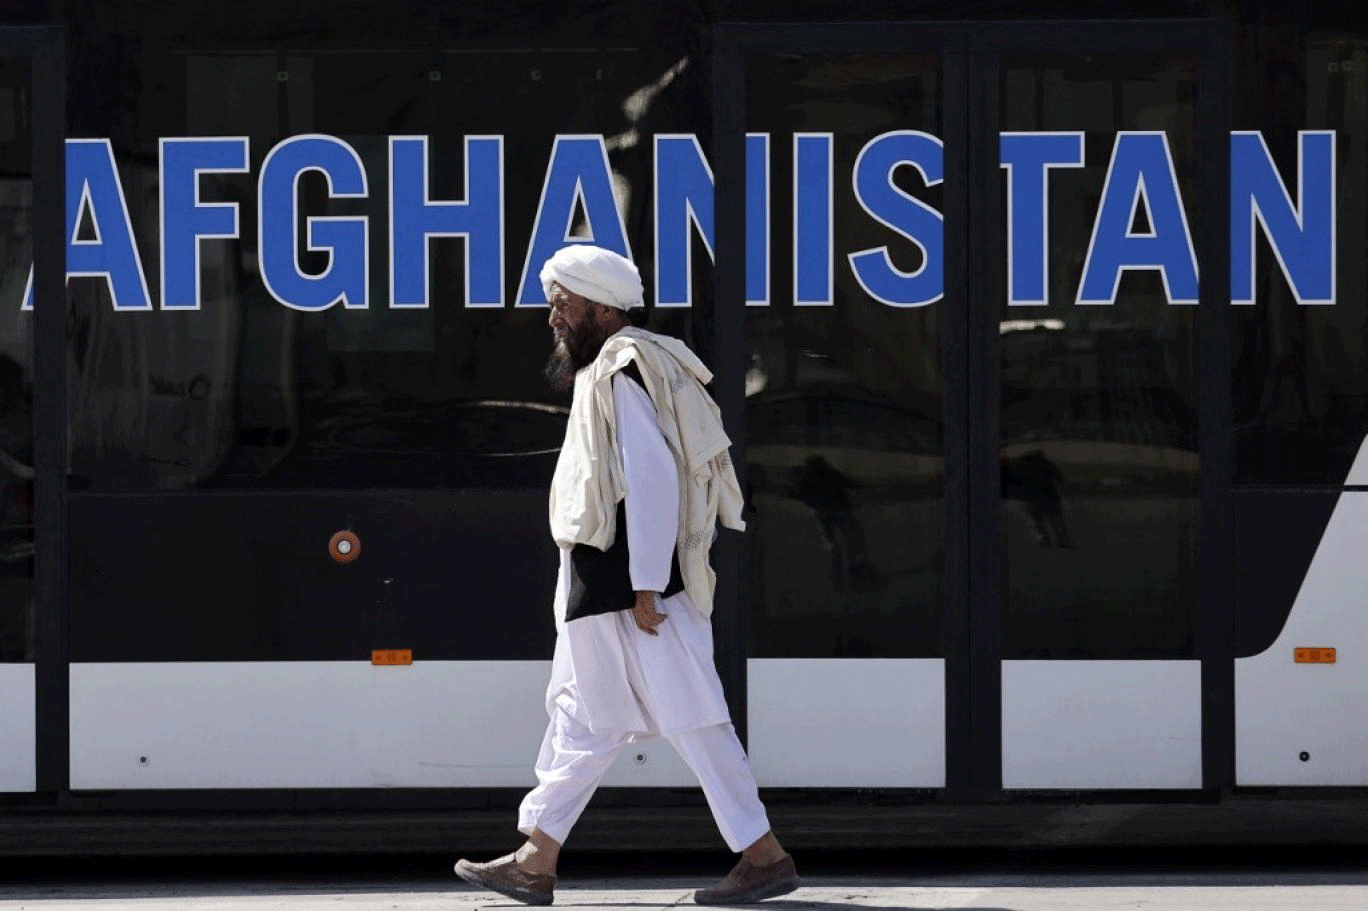 Joining the CPEC project, Pakistan began talks with the Afghan Taliban